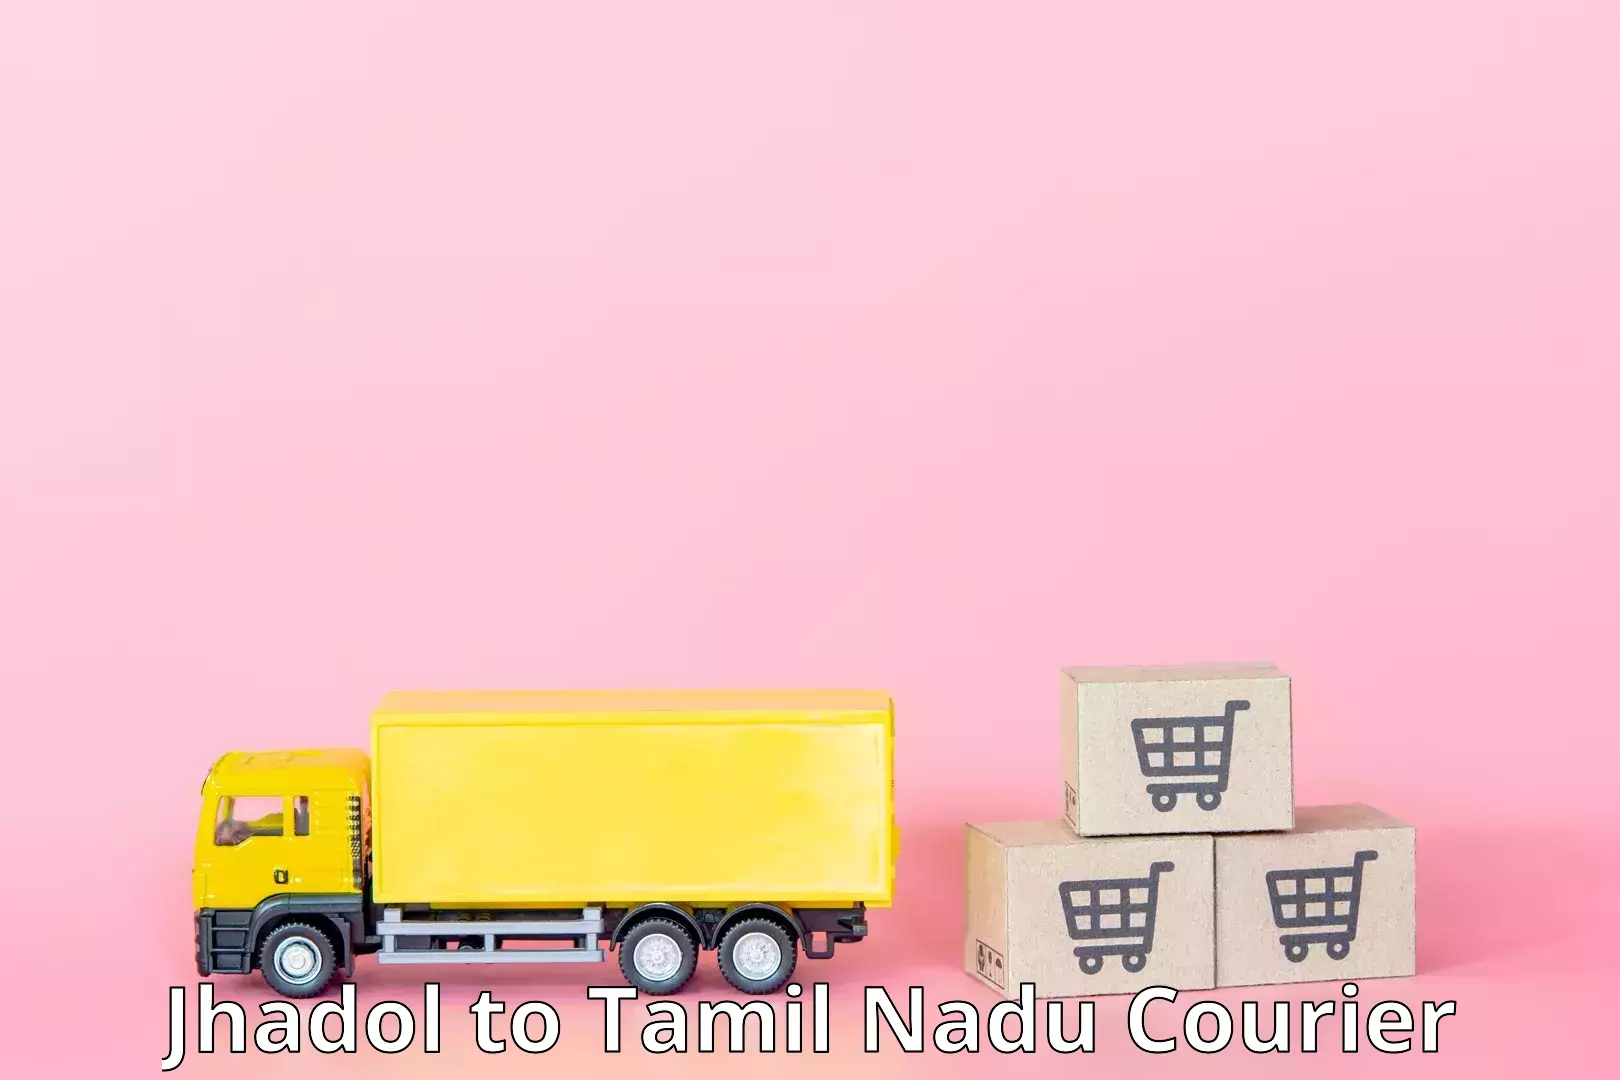 Express delivery network Jhadol to Velur